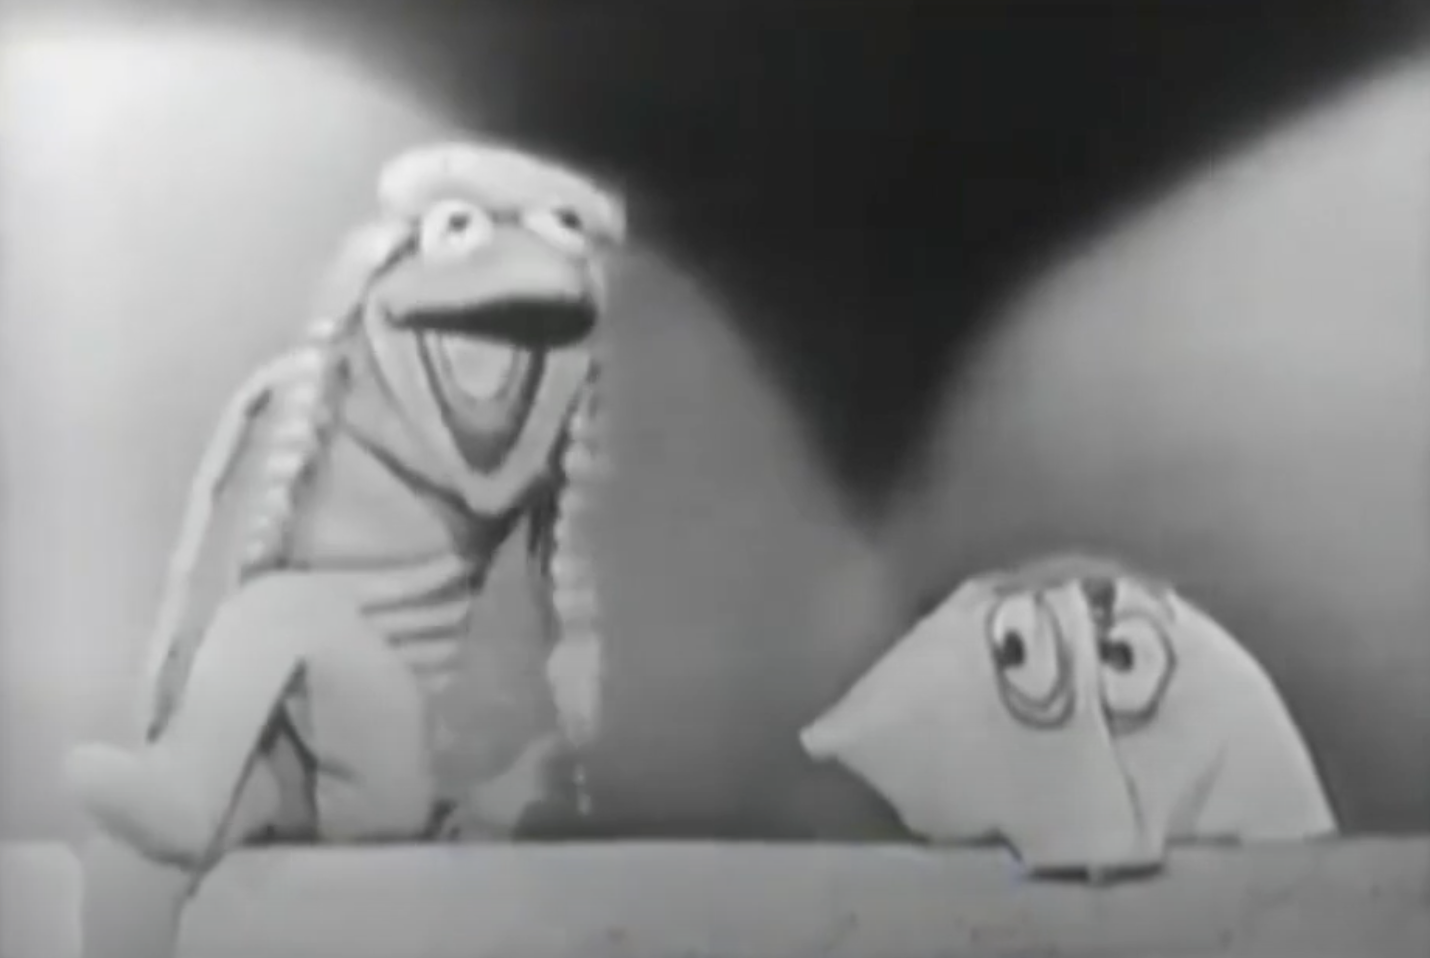 Jim Henson&#x27;s puppets, Kermit the Frog and Yorick, from a classic black-and-white television appearance, with Kermit wearing a happy expression